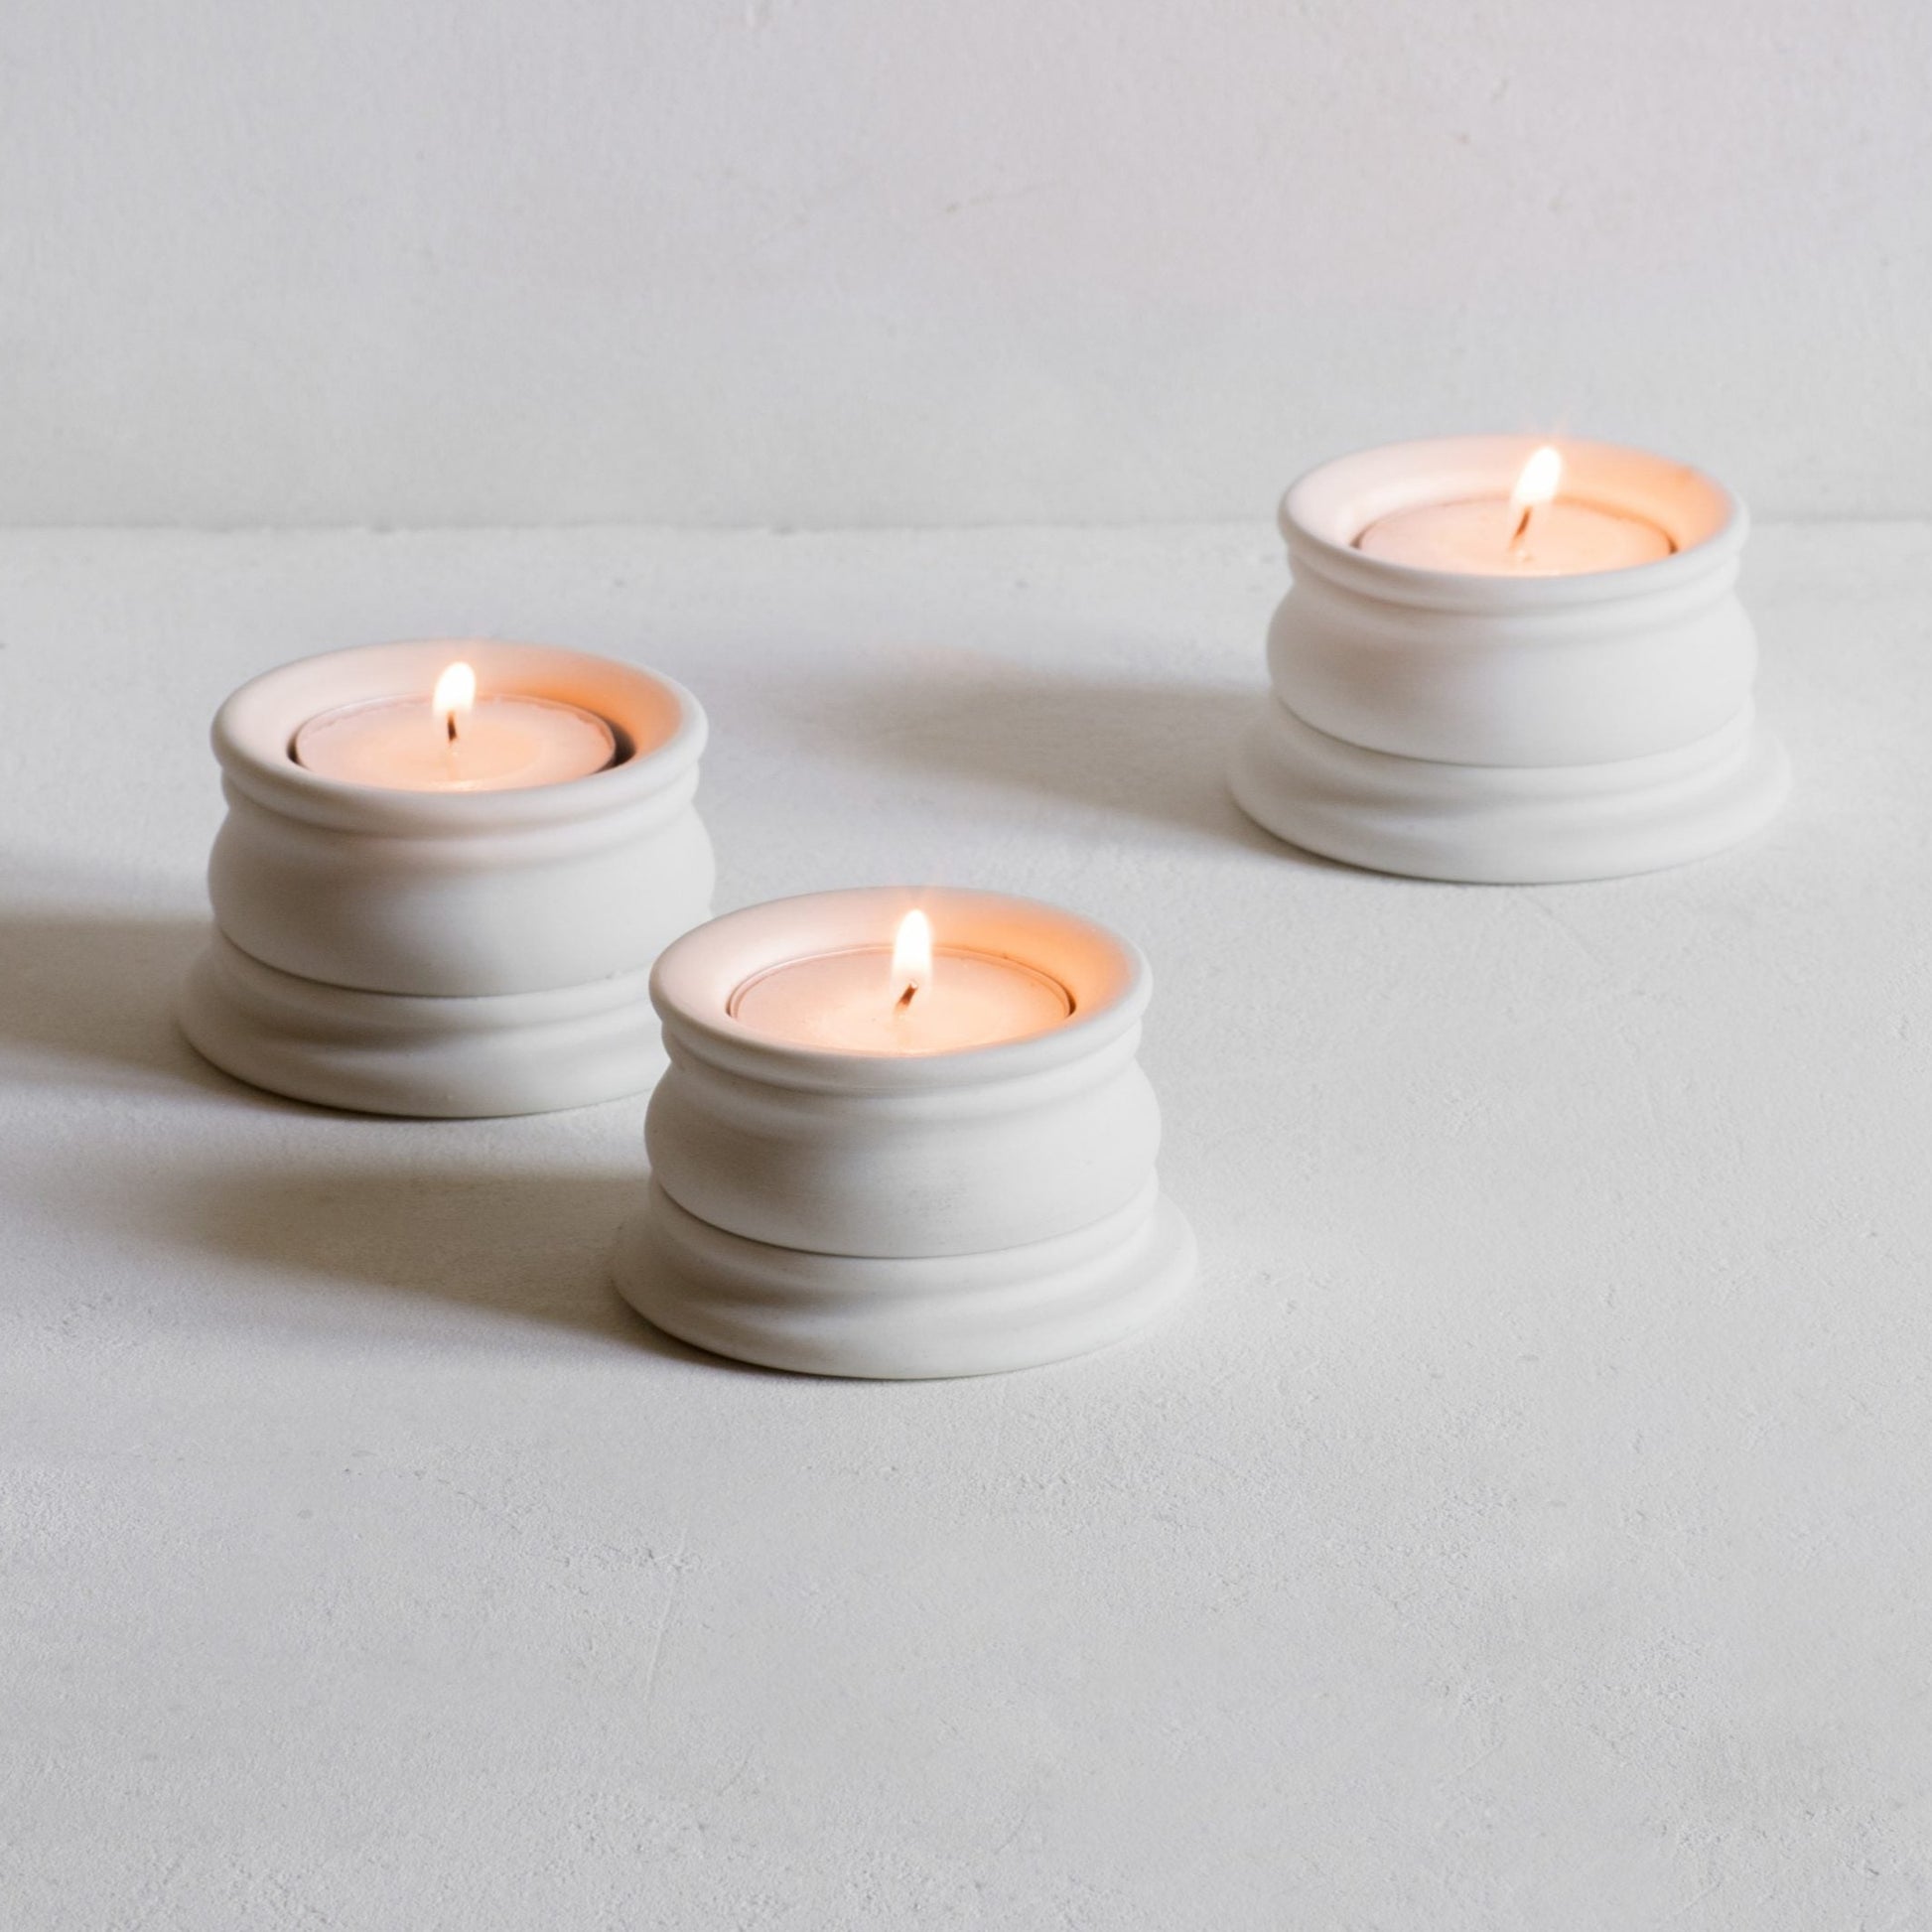 Classical Tealight Holders | Luxury Porcelain | Handmade in Wiltshire